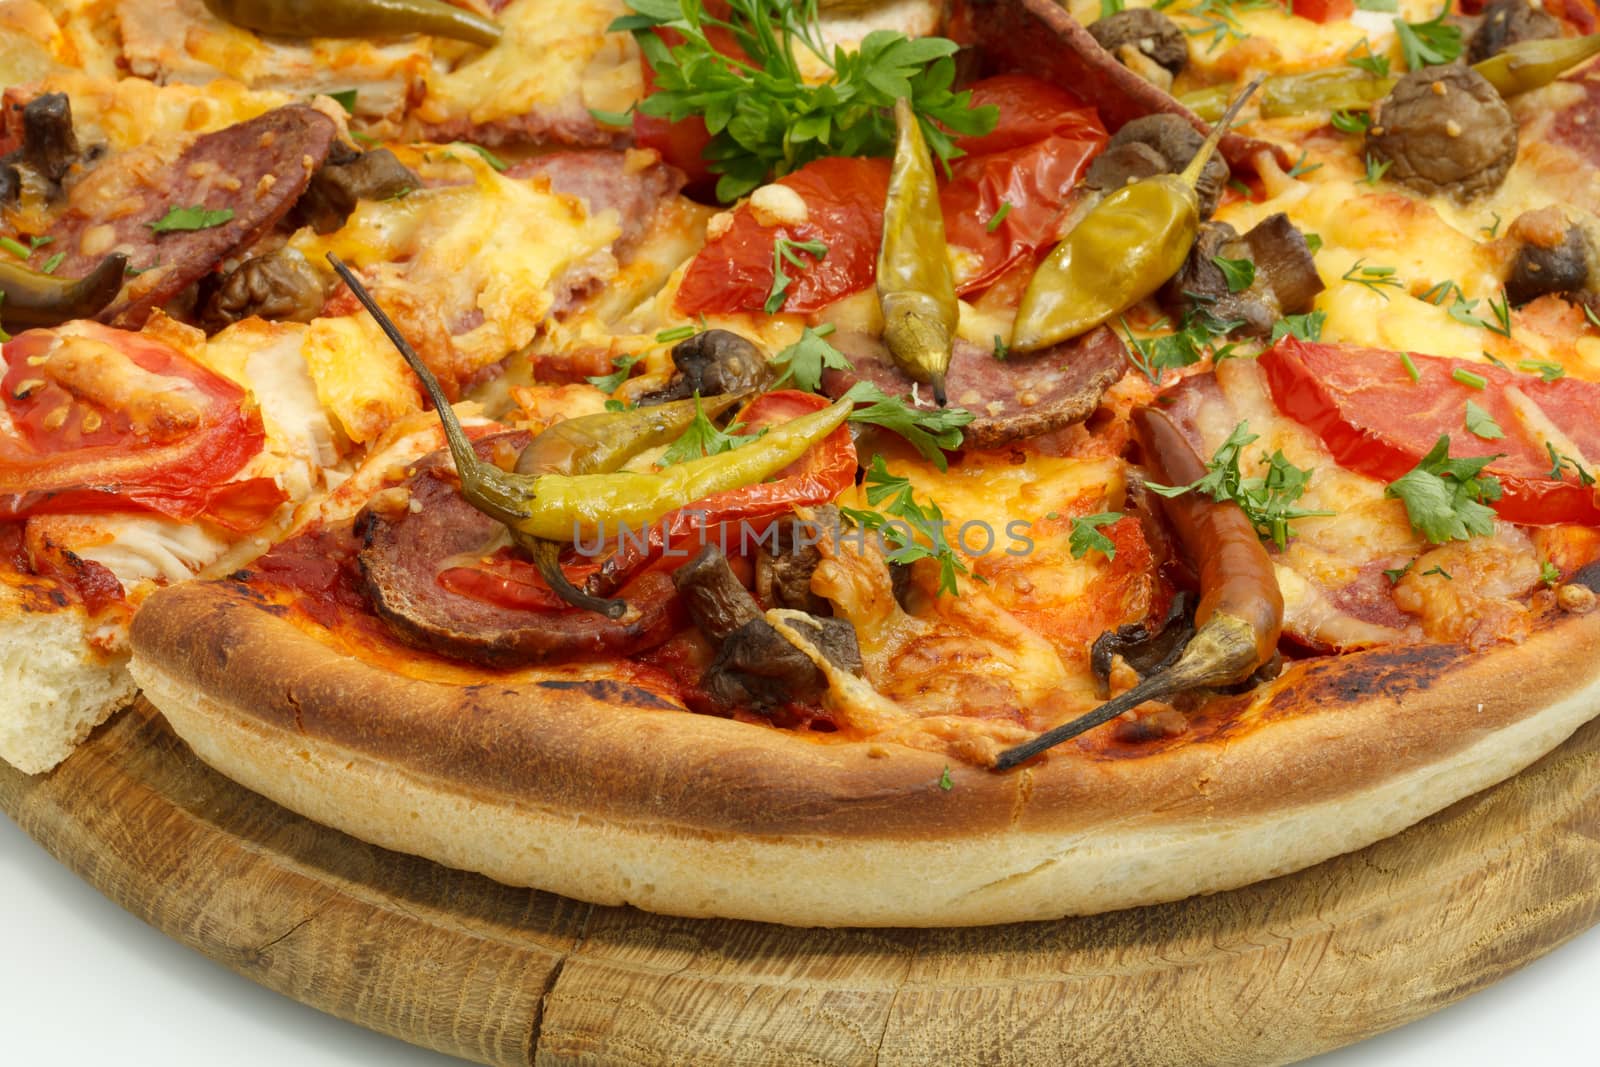 Pizza with sausage, mushrooms and hot pepper. by fogen